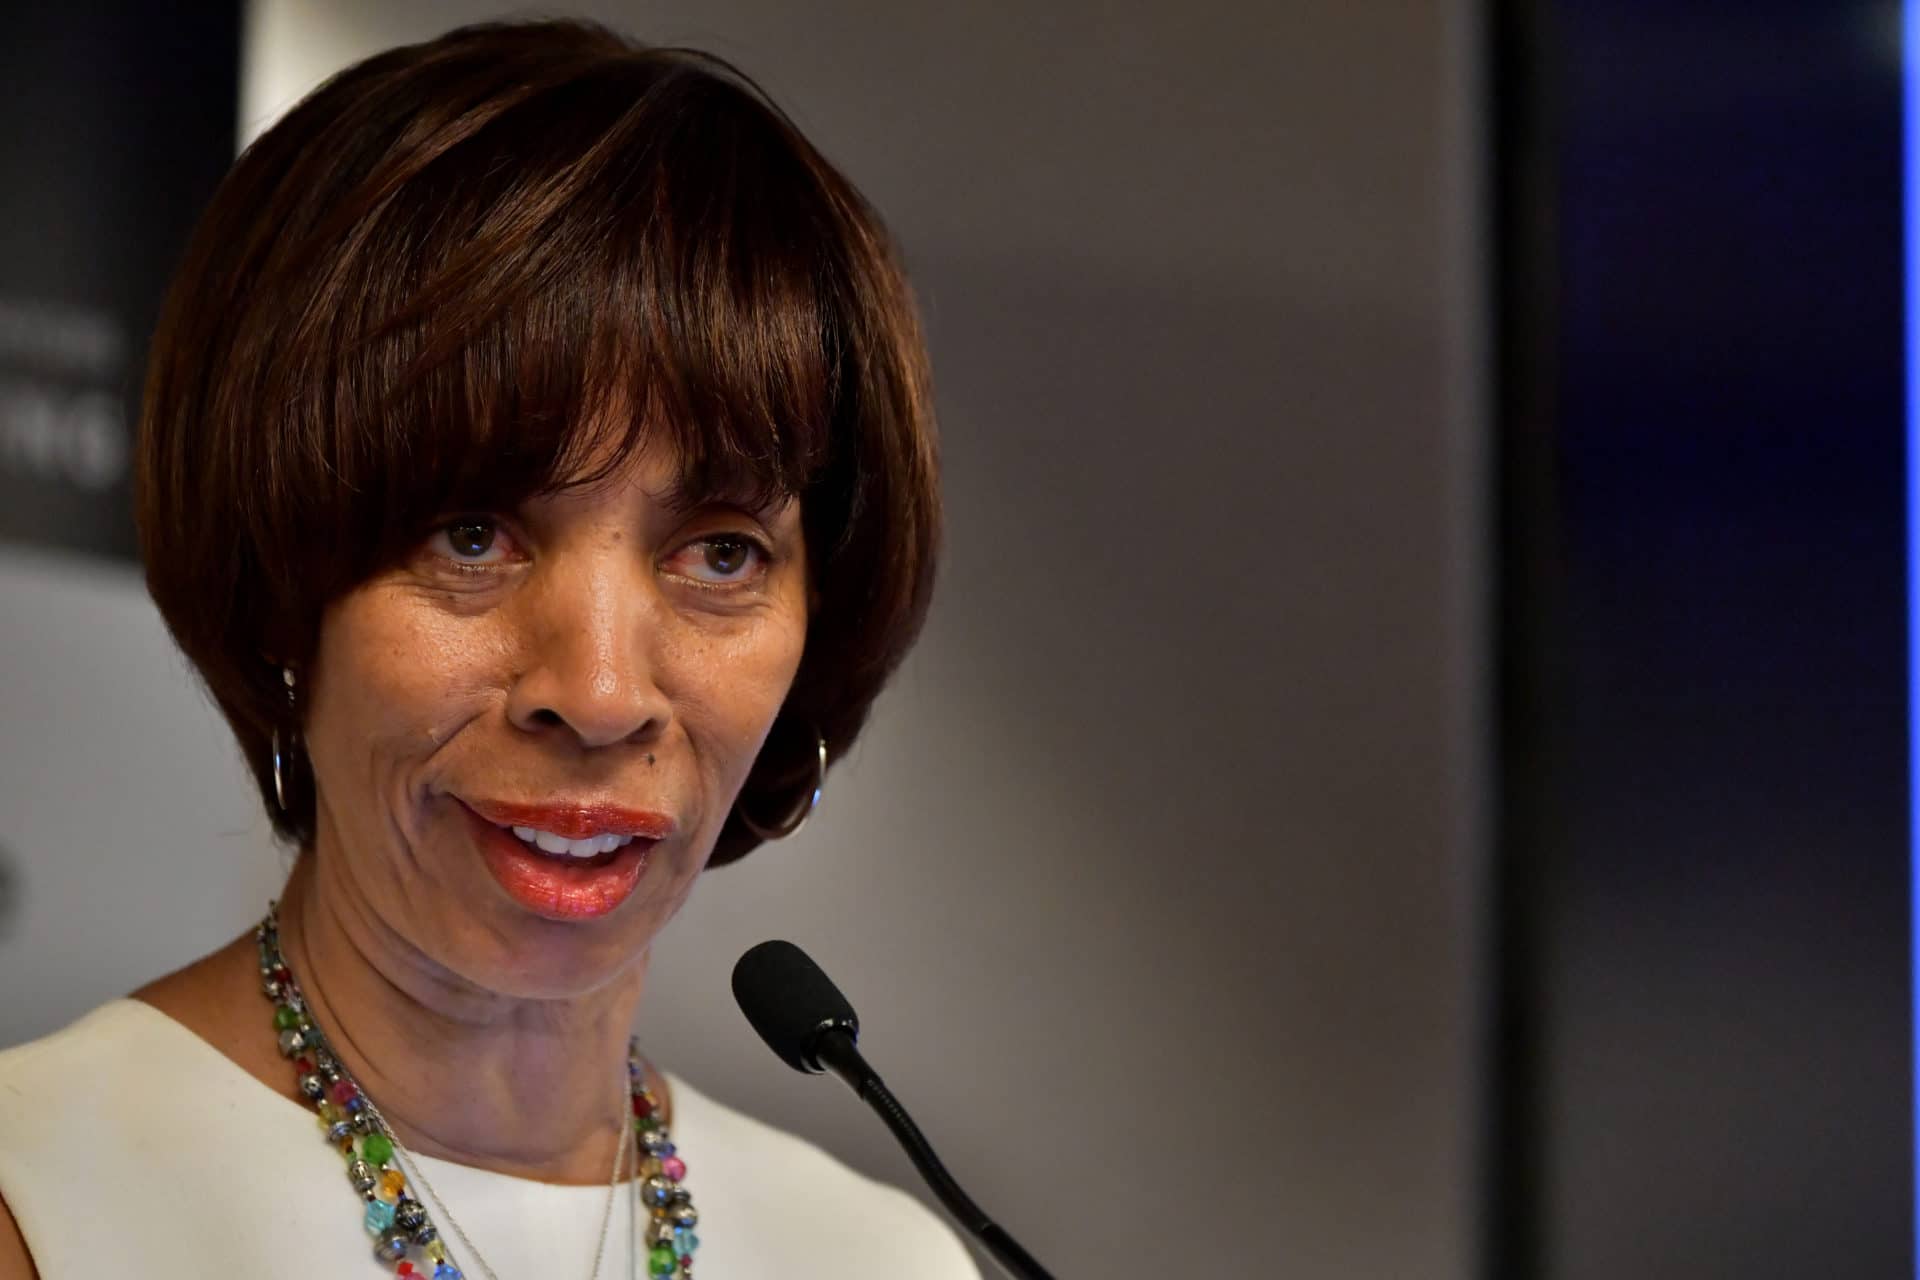 Baltimore Mayor Under Ethics Investigation for Questionable Book Deals